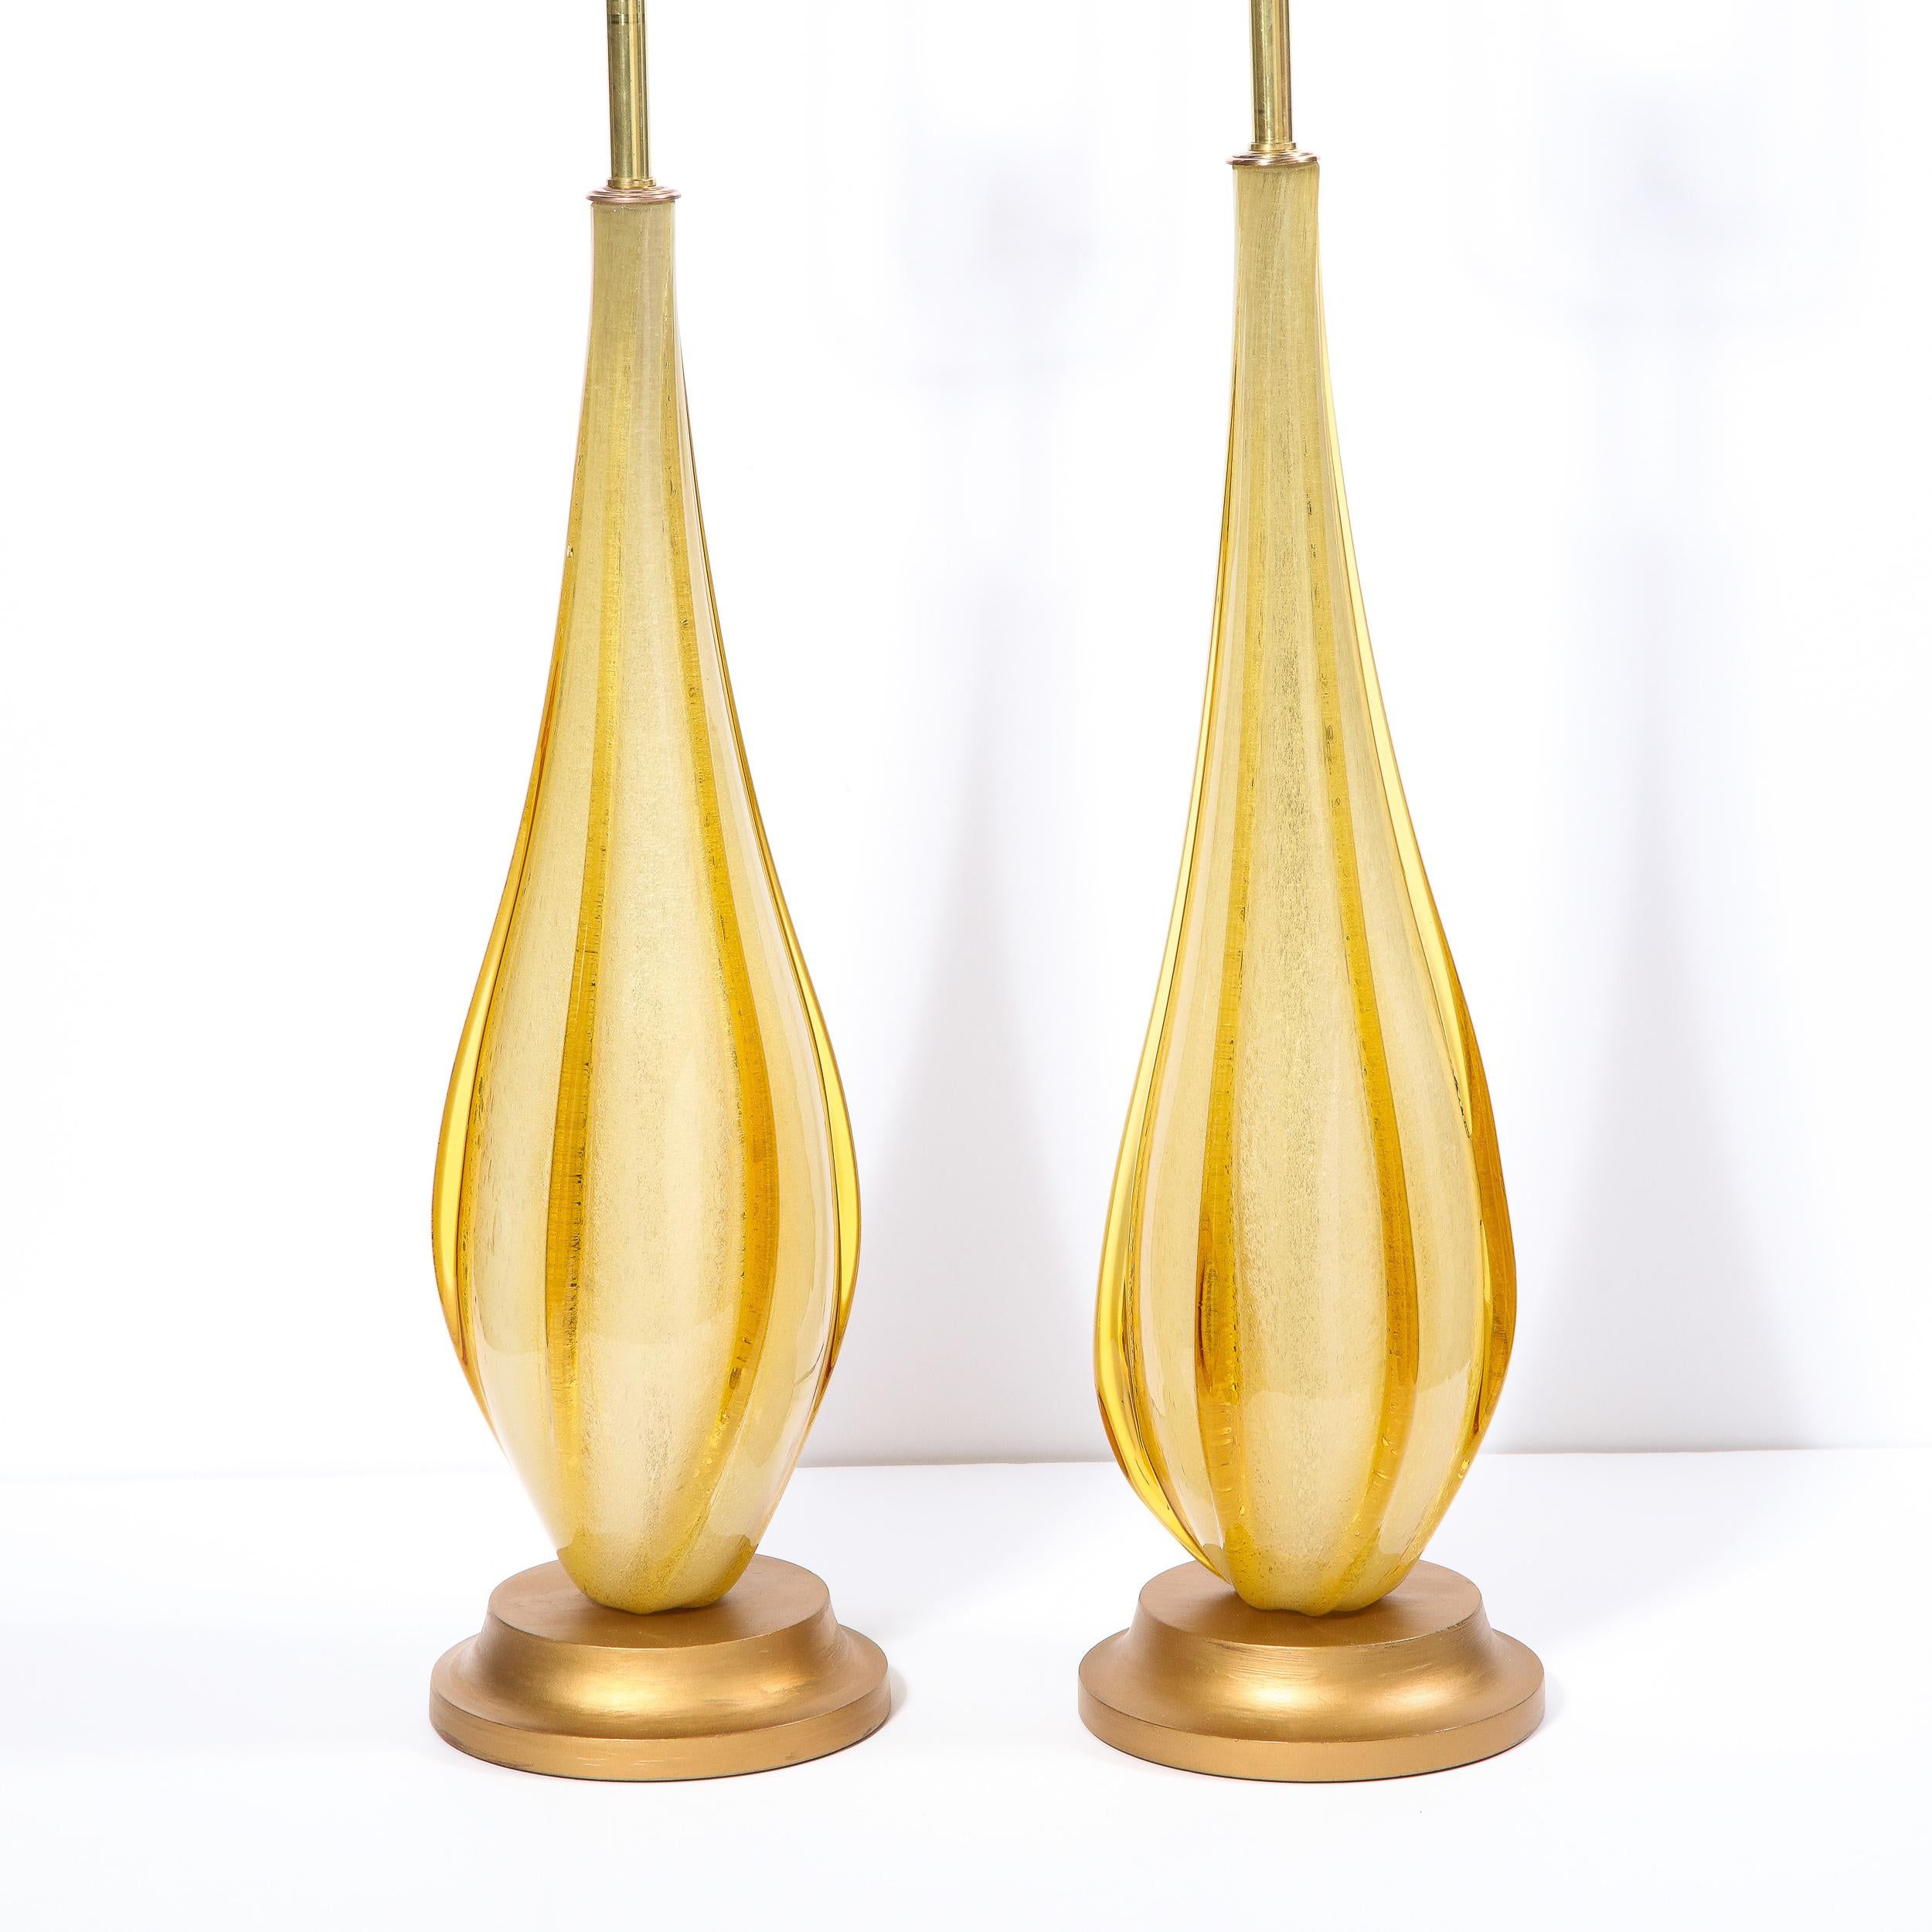 Italian Pair of Mid-Century Modern Handblown Murano Table Lamps with Brass Fittings